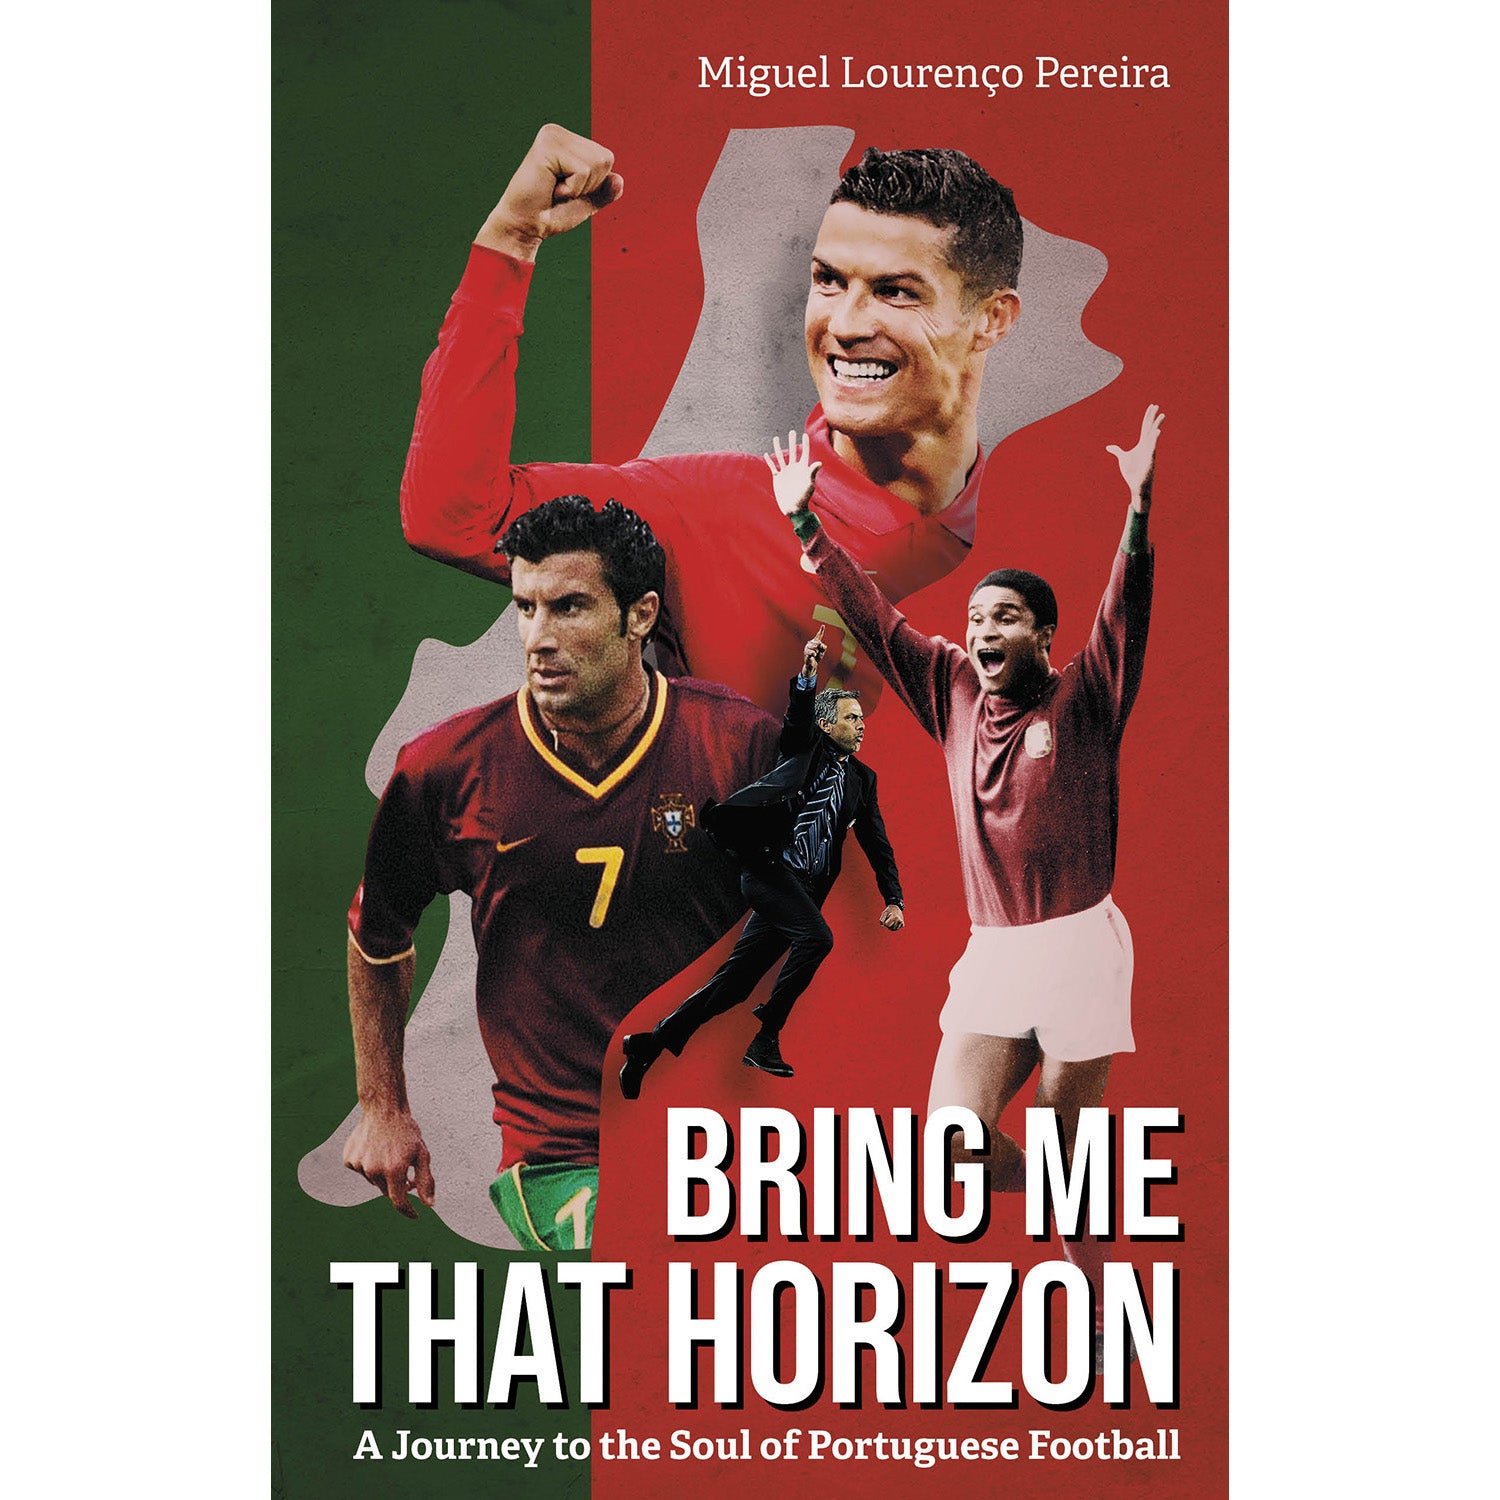 Bring Me That Horizon – A Journey to the Soul of Portuguese Football